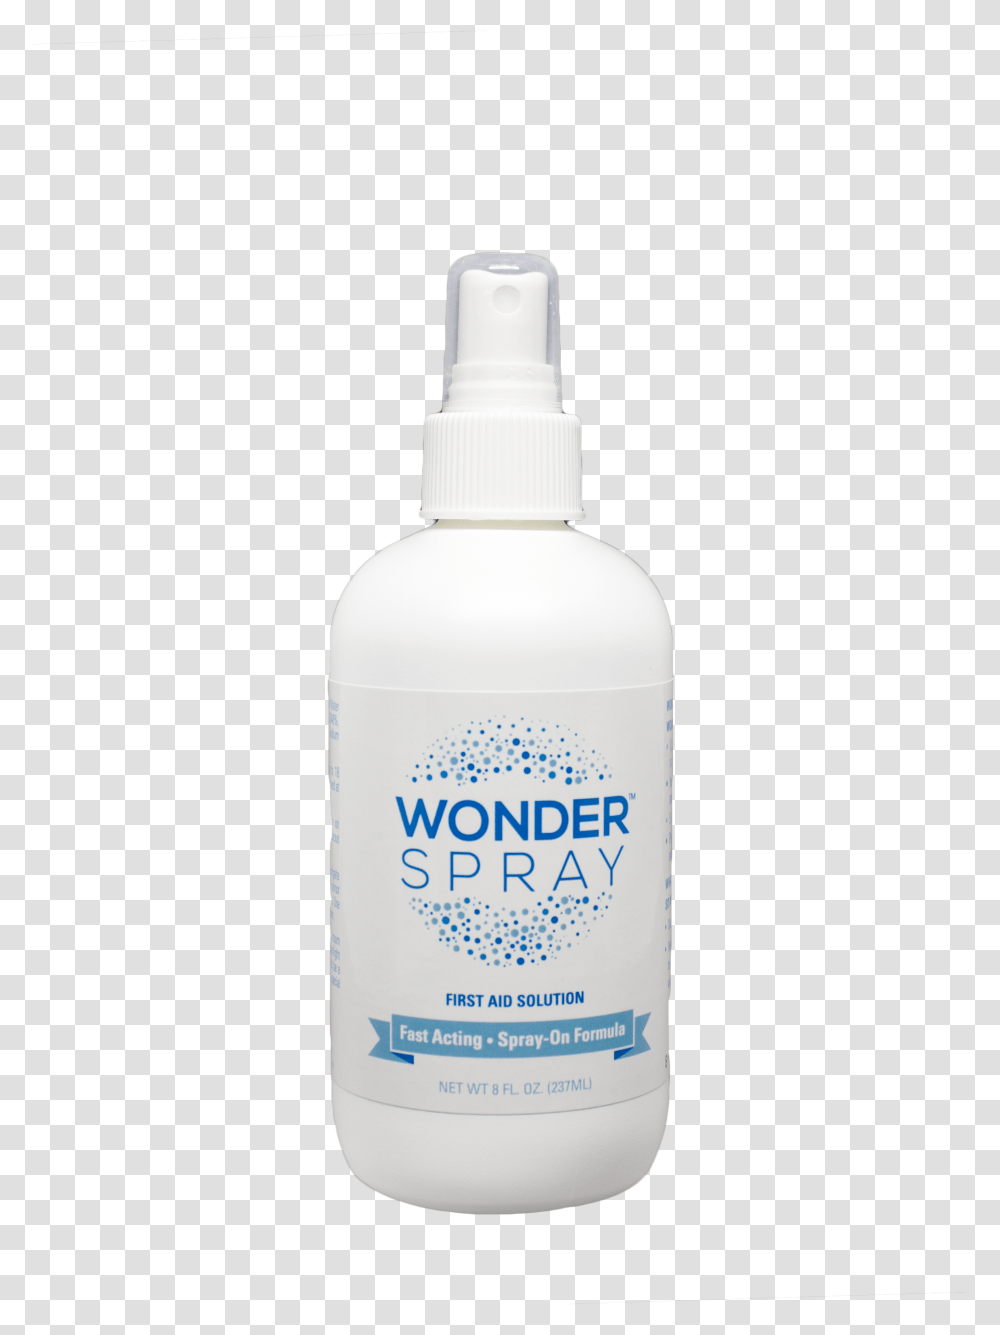 Wonder Spray First Aid Solution Plastic Bottle, Cosmetics, Shaker, Sunscreen Transparent Png